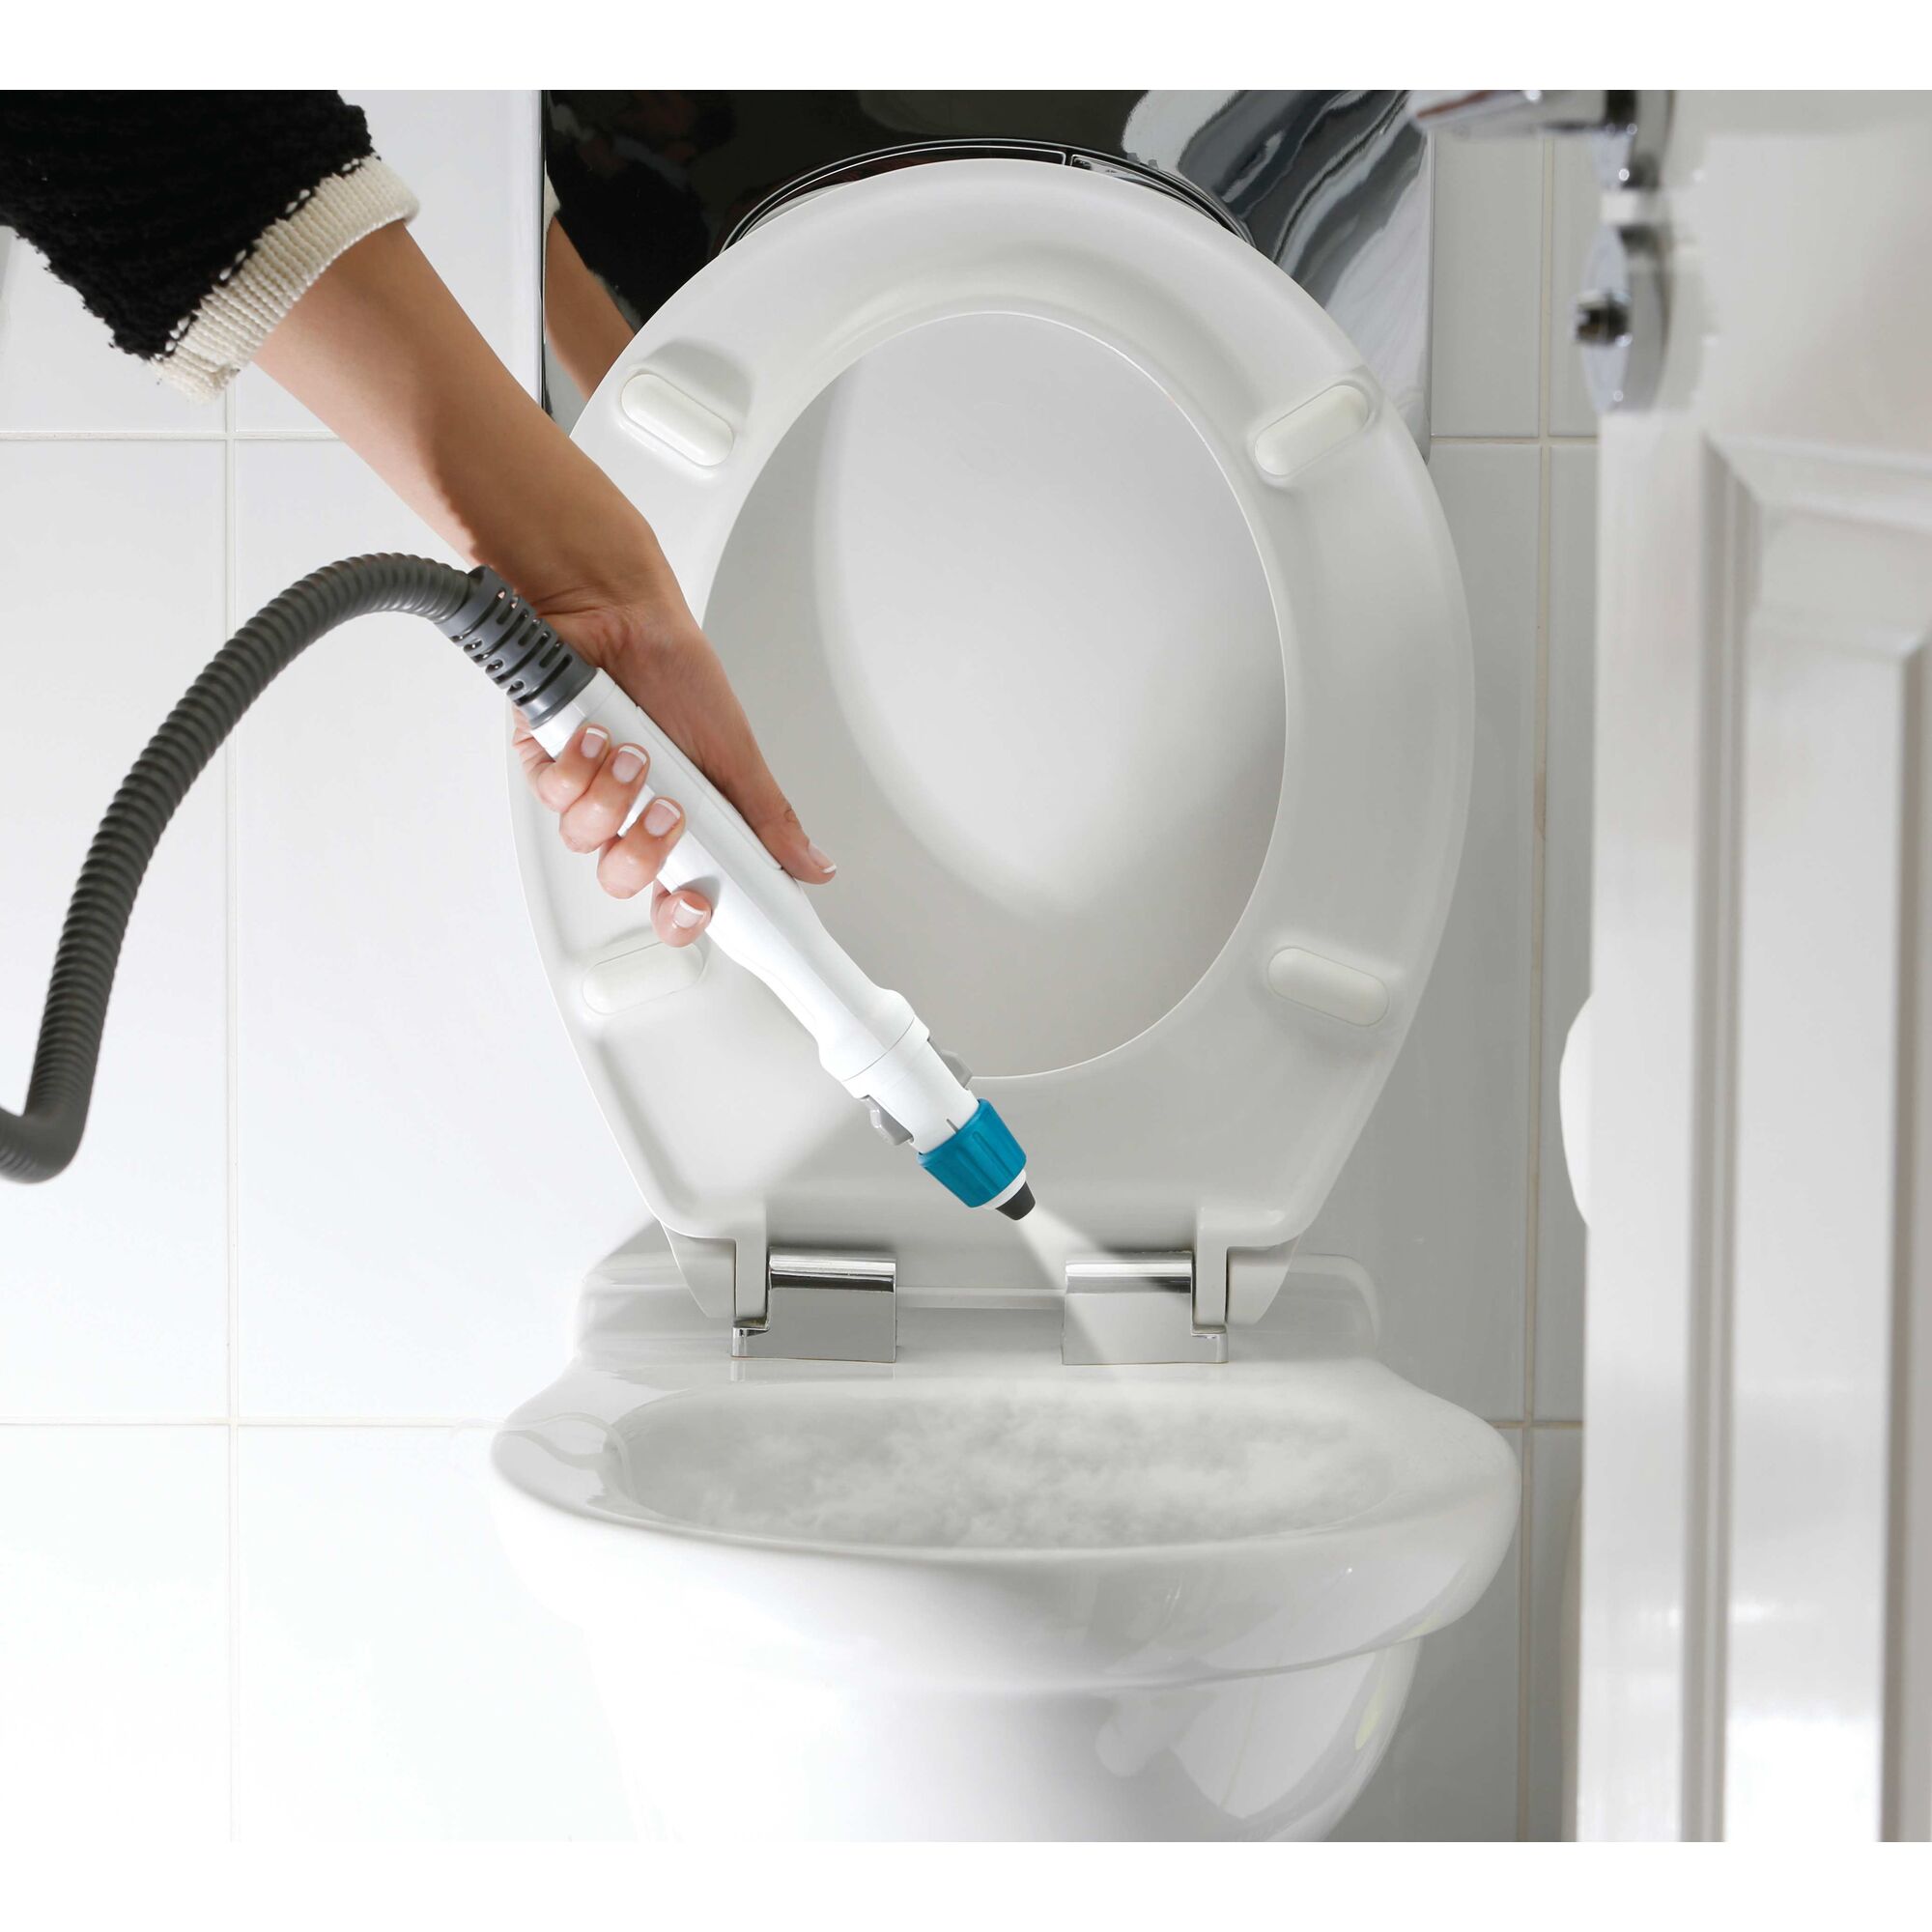 7 in 1 steam mop with steamglove handheld steamer being used in the washroom.